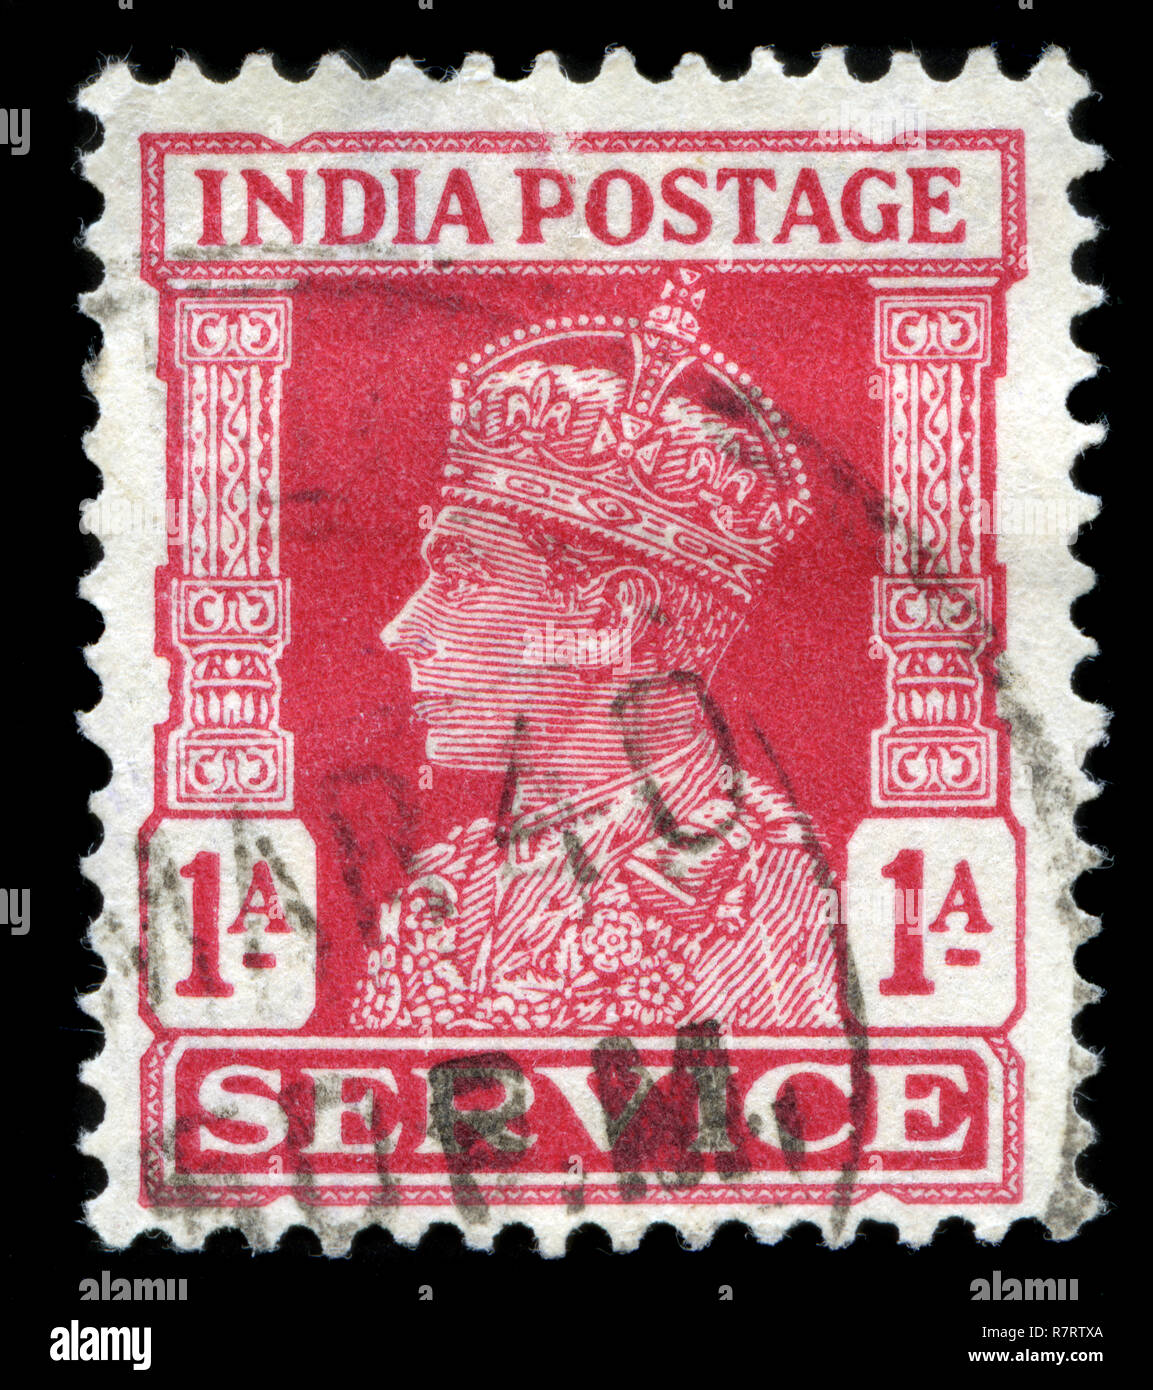 Internet  Along with the handwritten letter, the postage stamp is dying -  Telegraph India